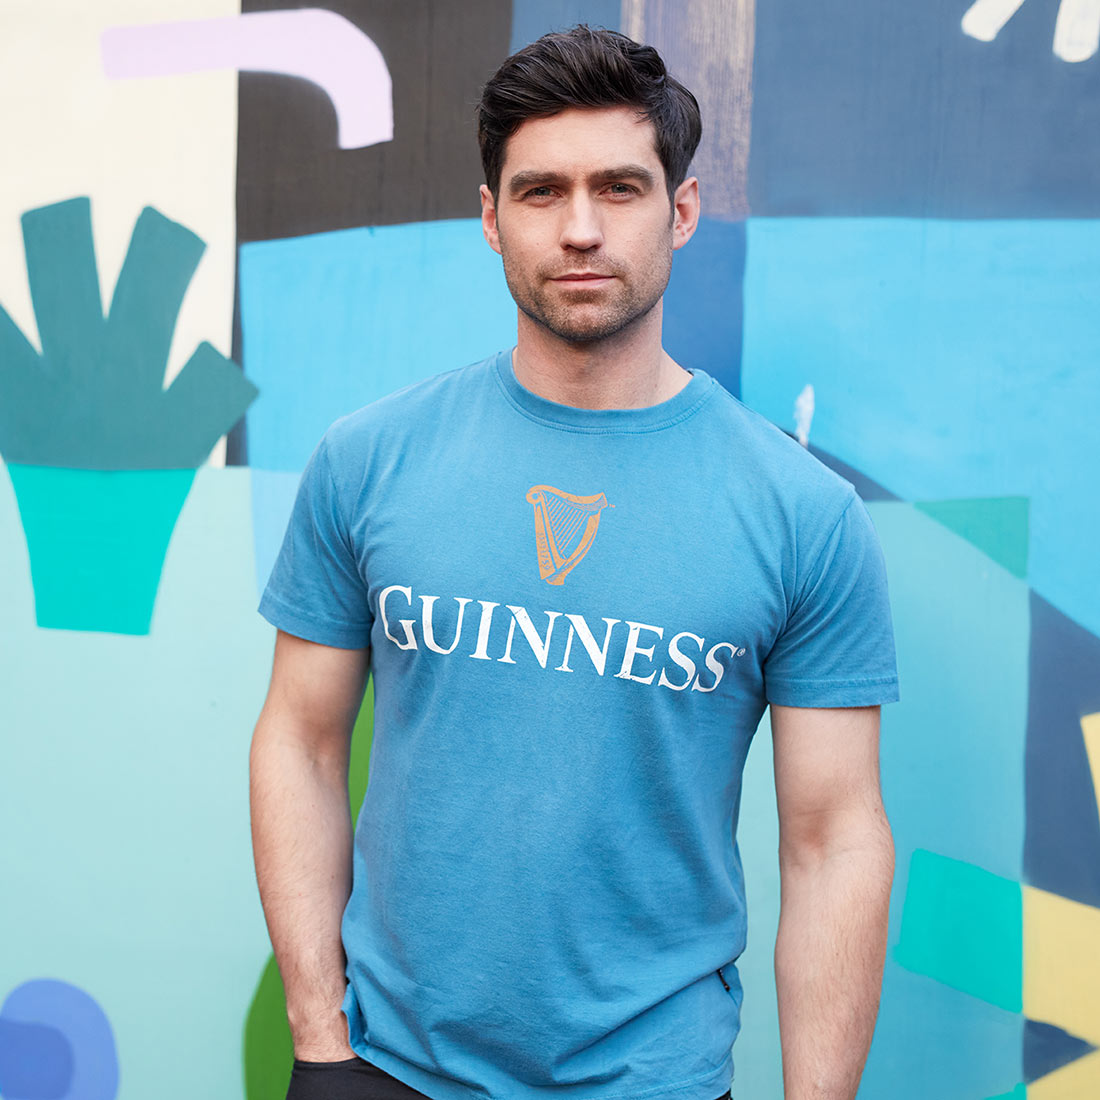 This Guinness Trademark Label T-Shirt Blue is available for men.